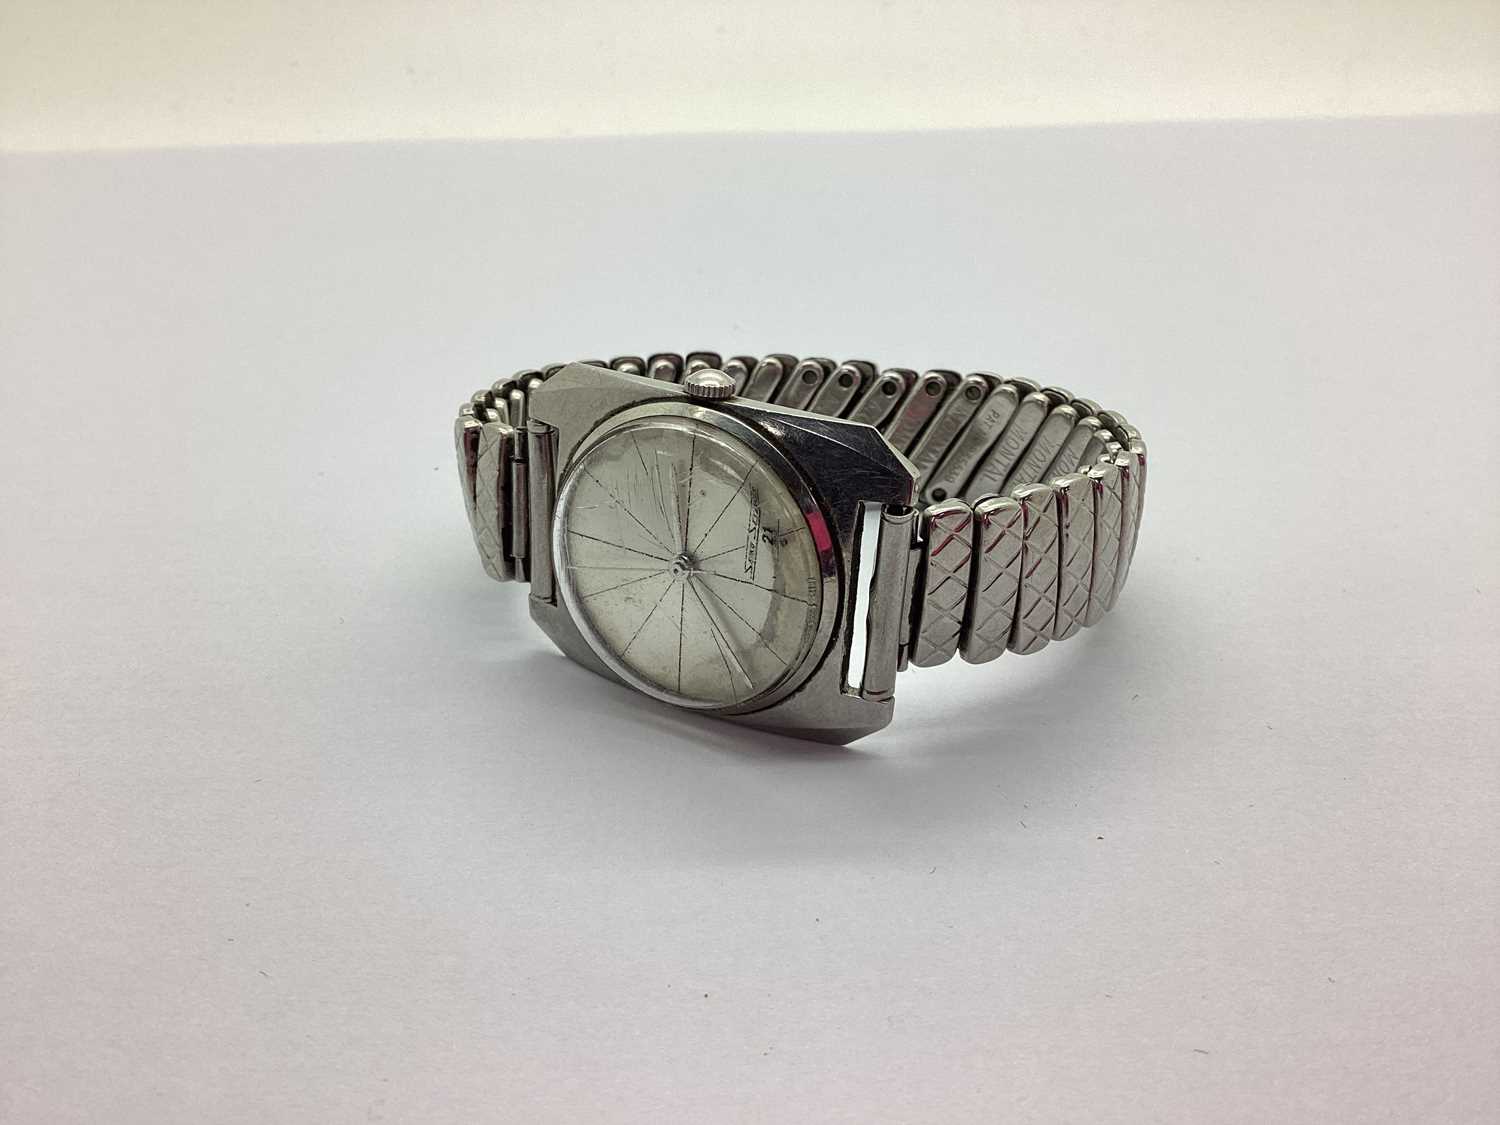 Seiko; A c.1960's Skyliner Gent's Wristwatch, (6220 7990) the signed dial with line detail and